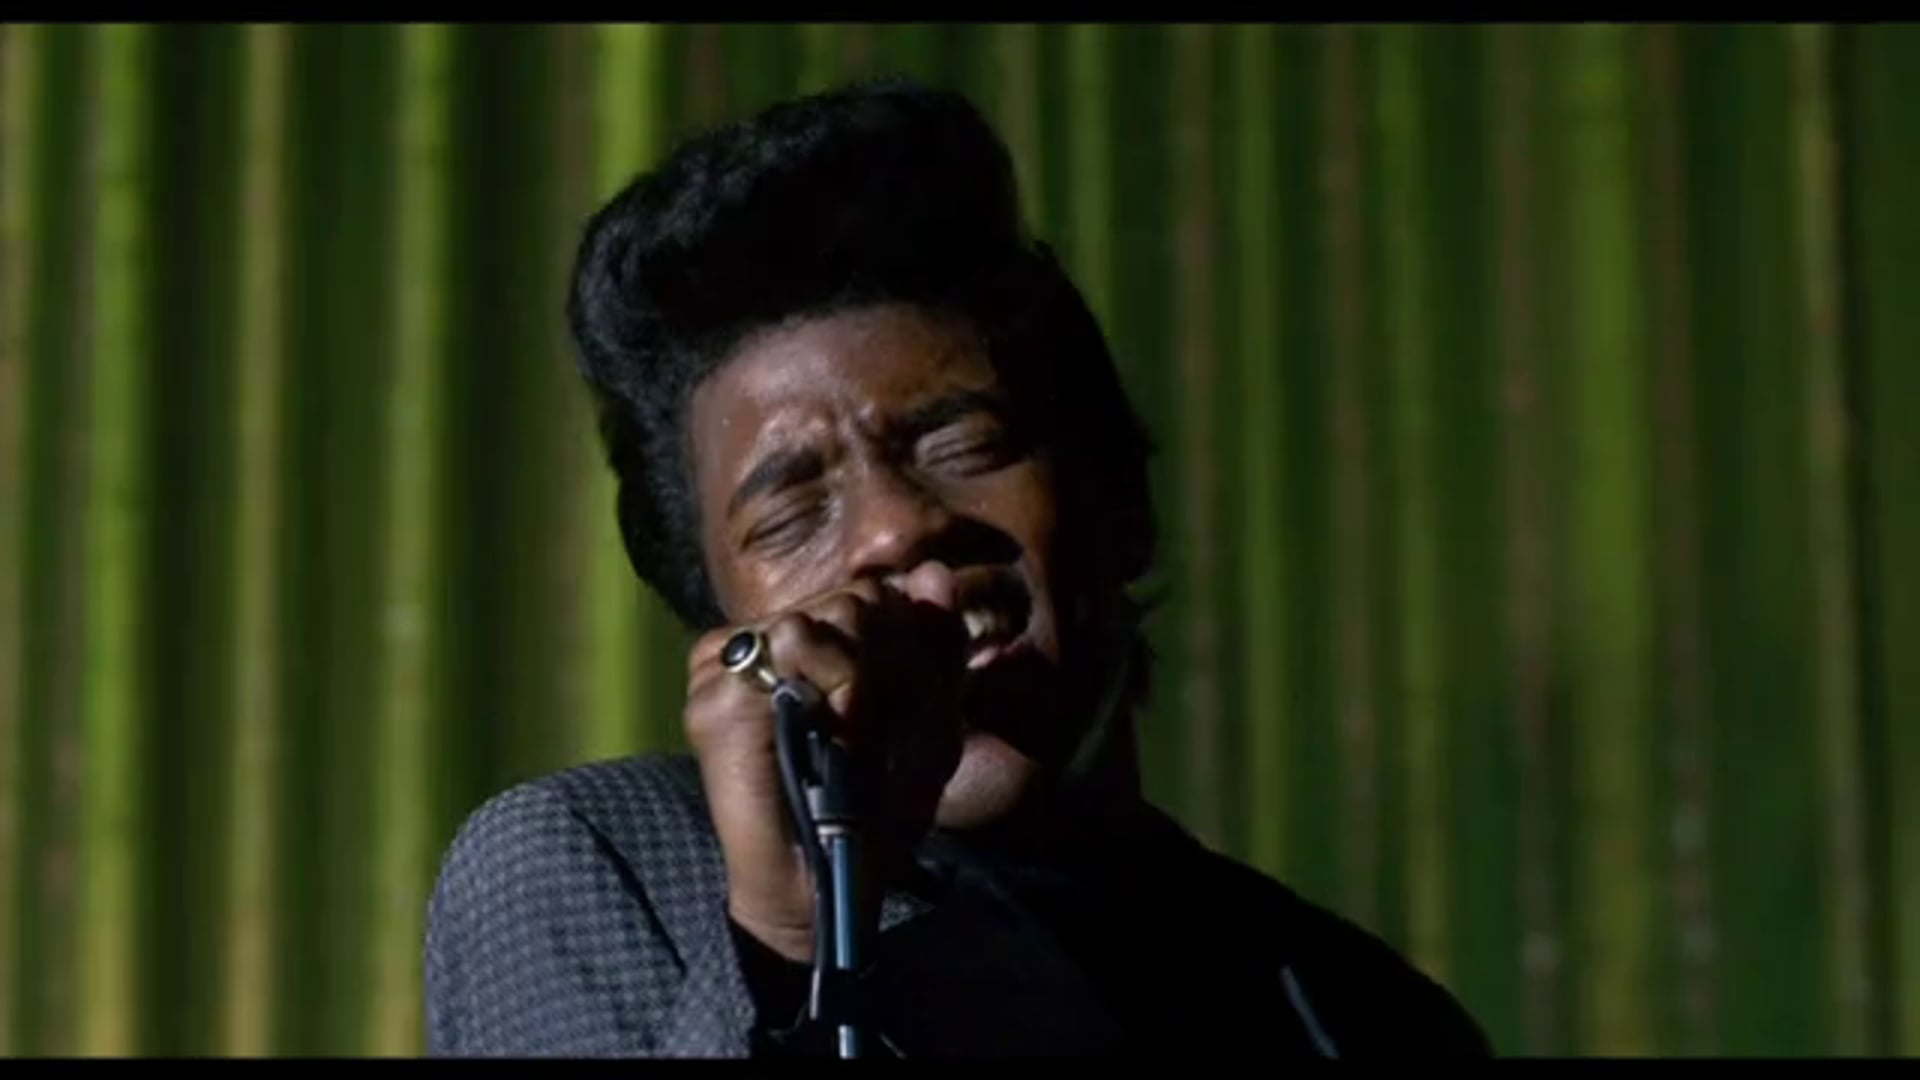 "Get On Up" Exclusive Behind The Scenes Trailer